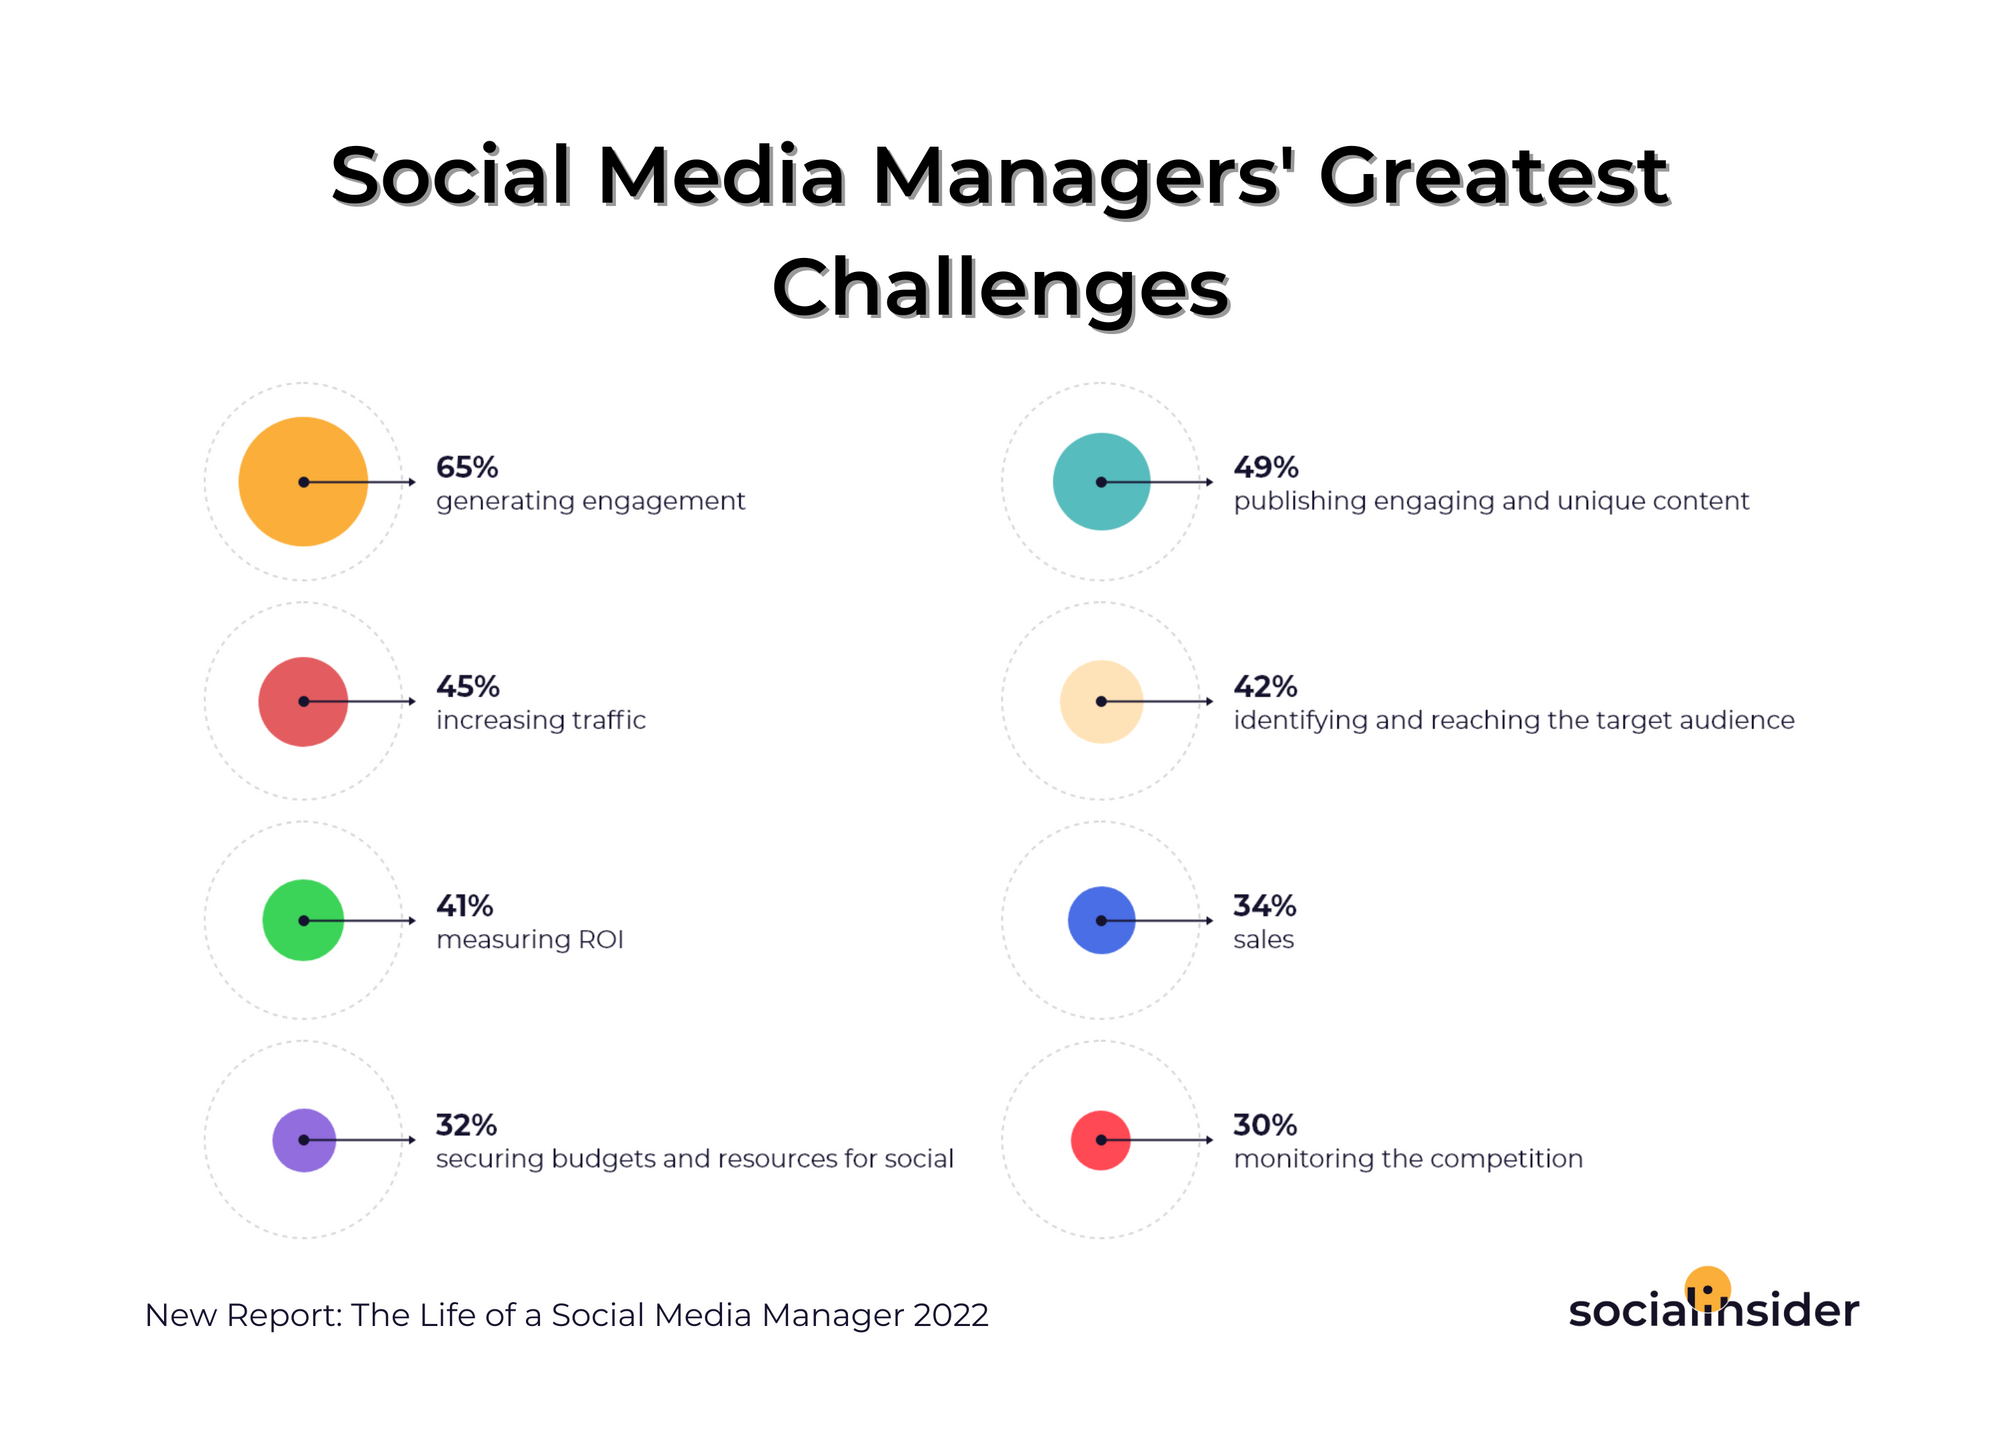 This is a chart showing social media managers' greatest challenges